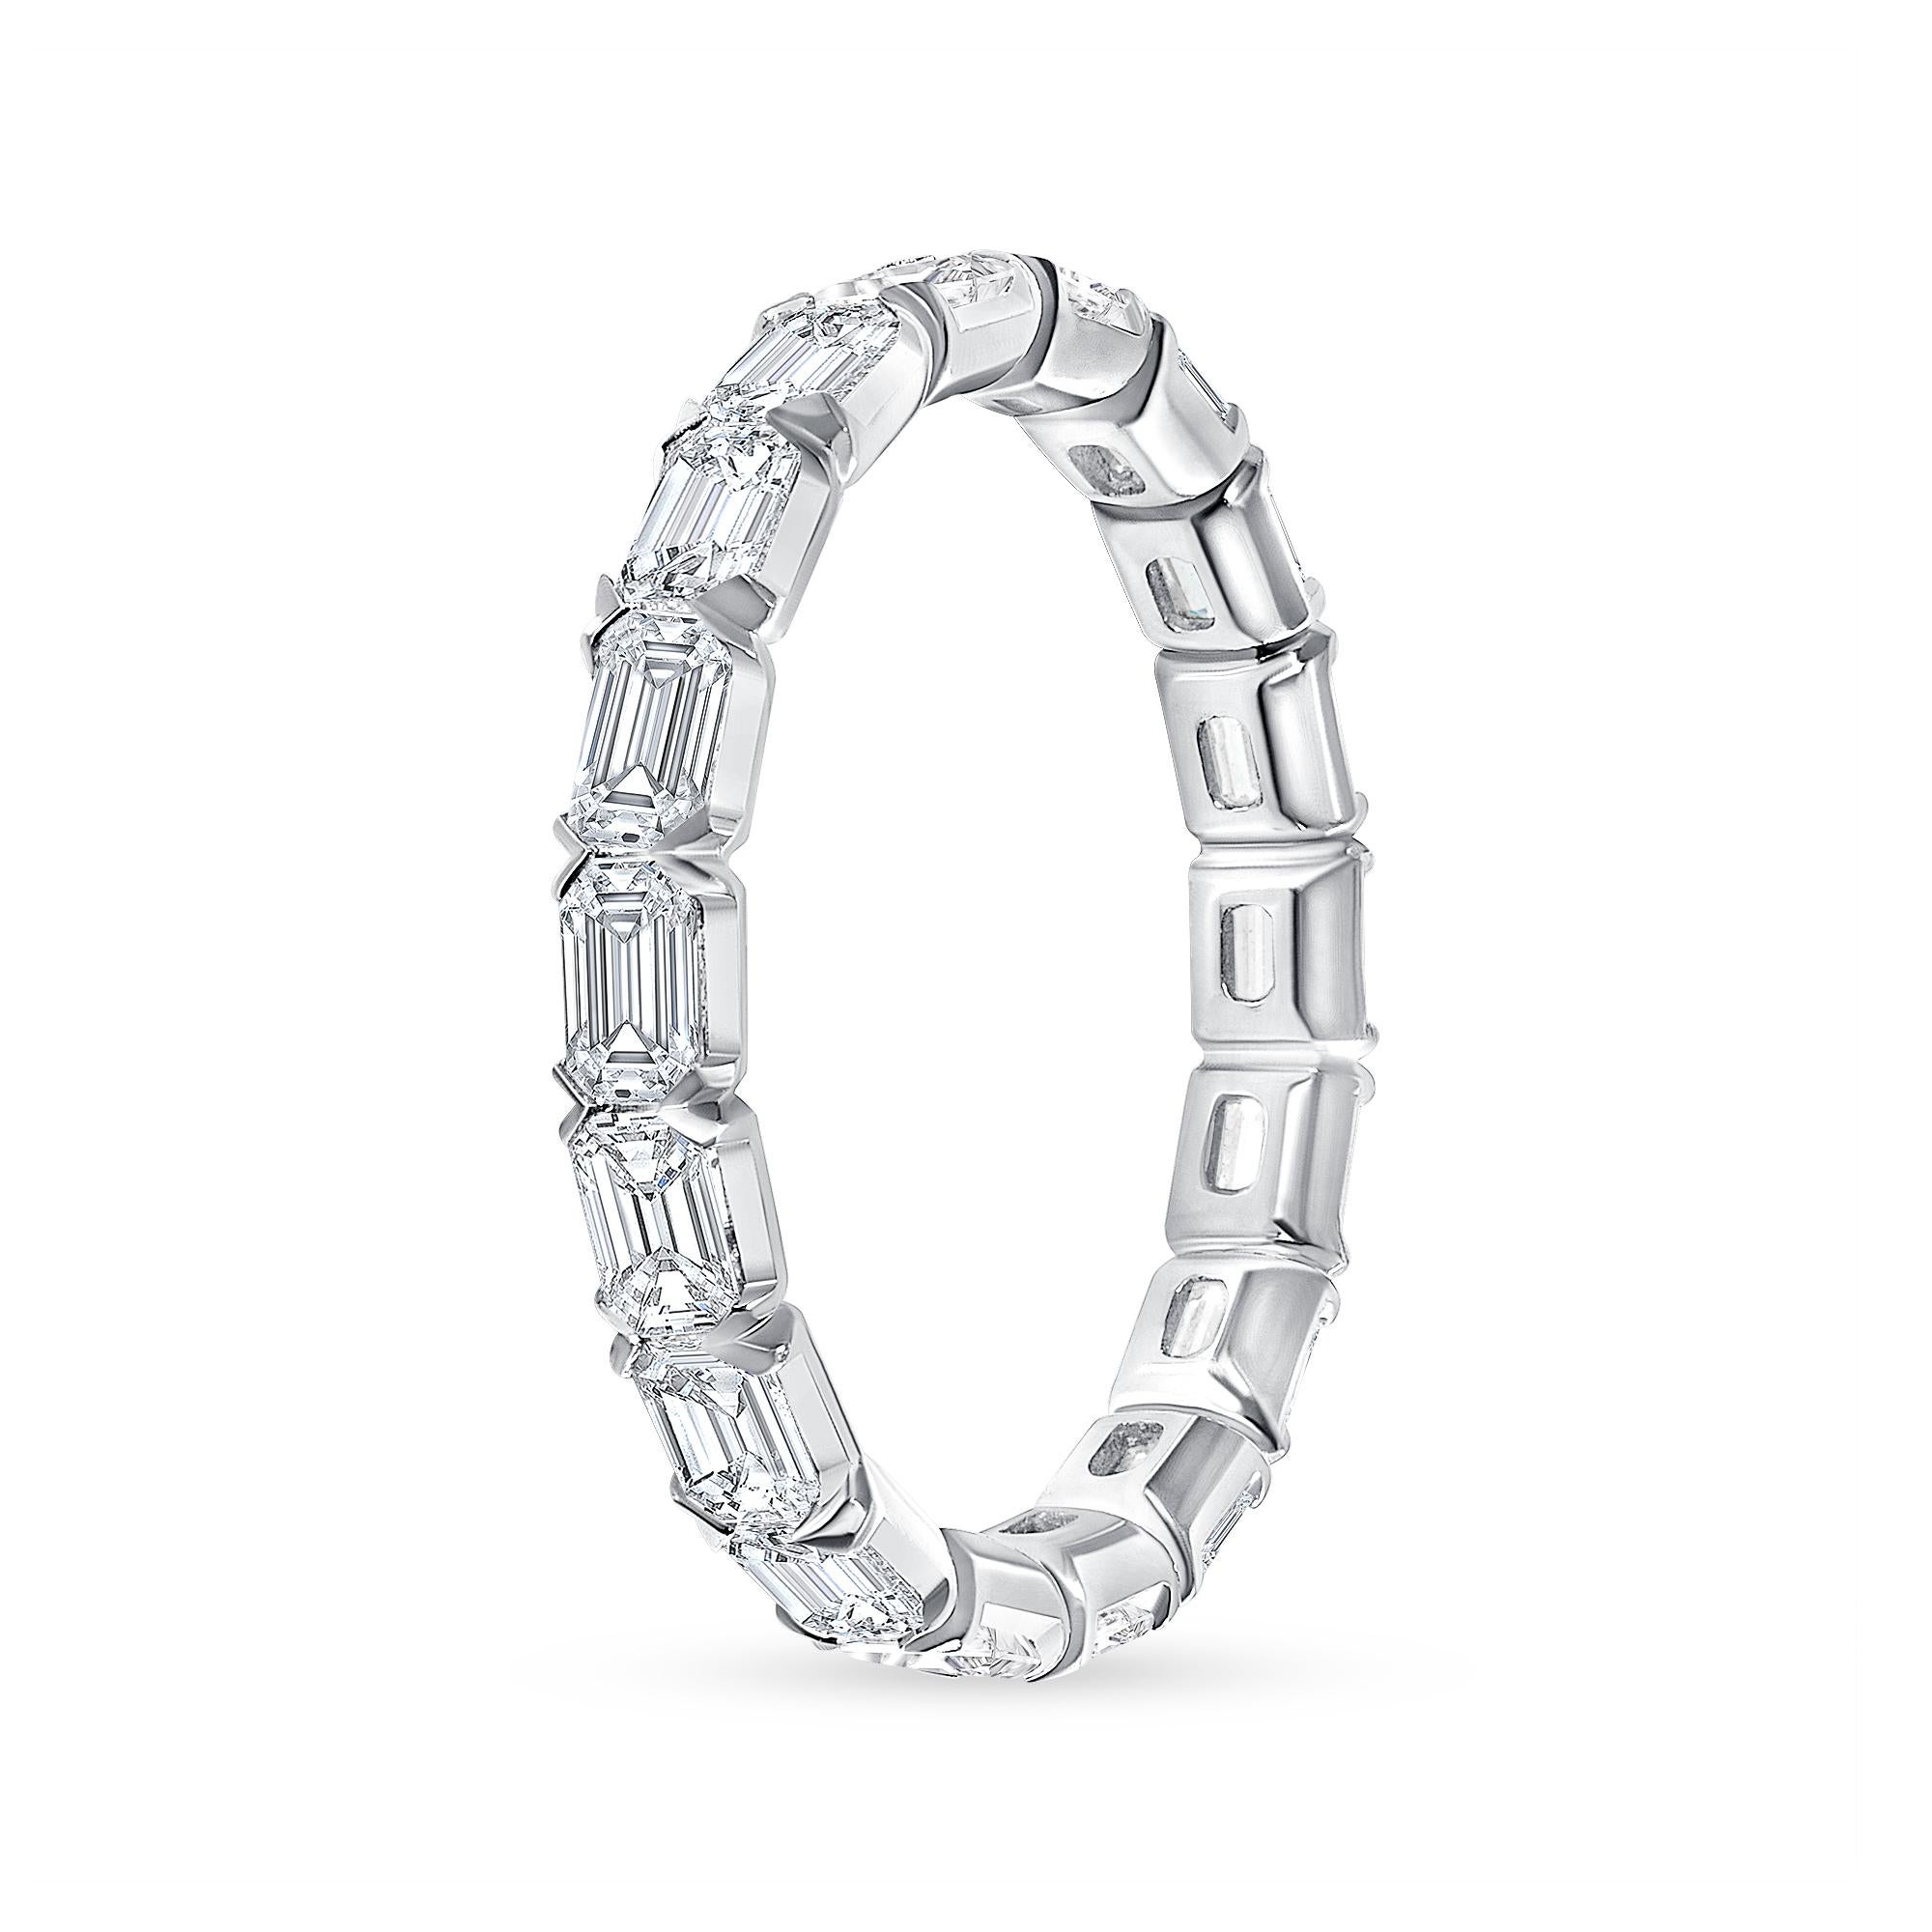 For Sale:  2.5 Carat East-West Diamond Eternity Band, Real Diamond Ring, 18k White Gold 3